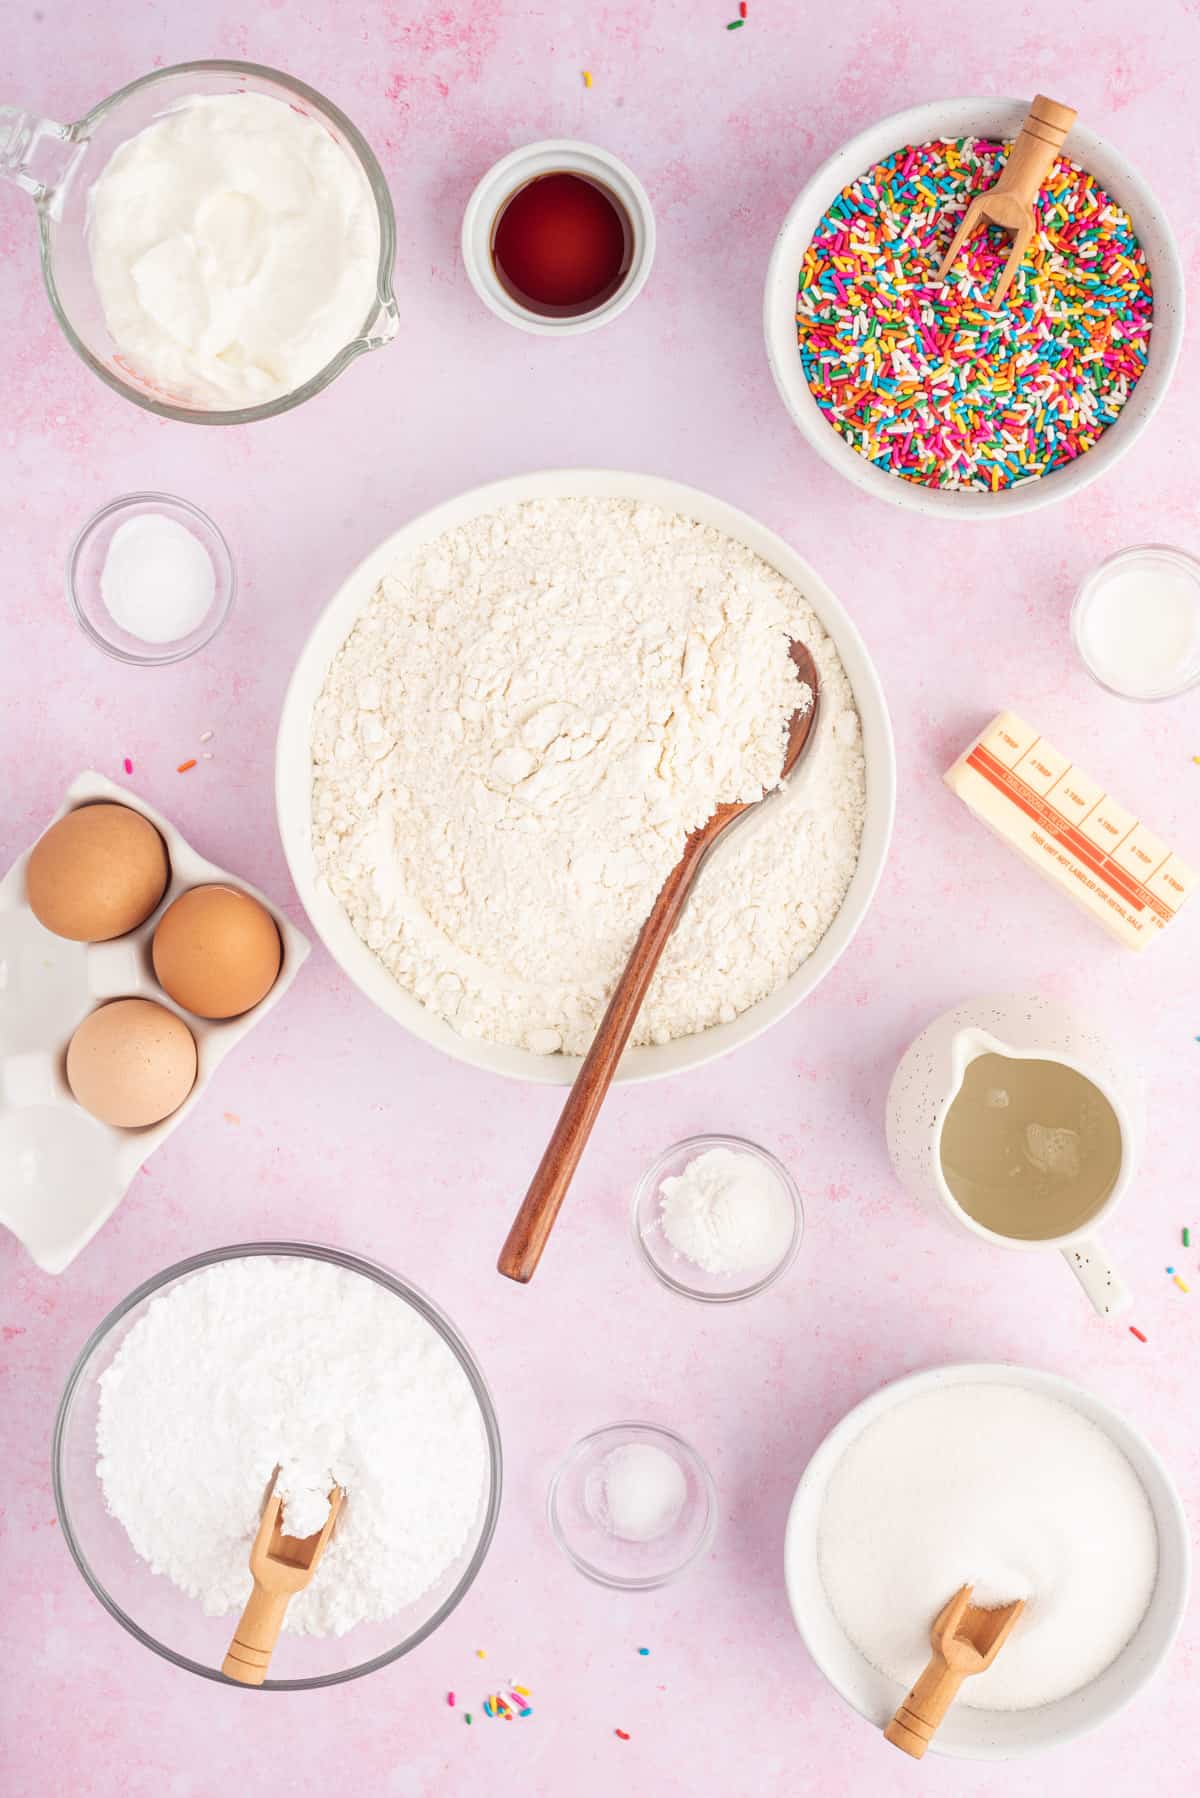 The ingredients for funfetti muffins are placed on a pink surface.